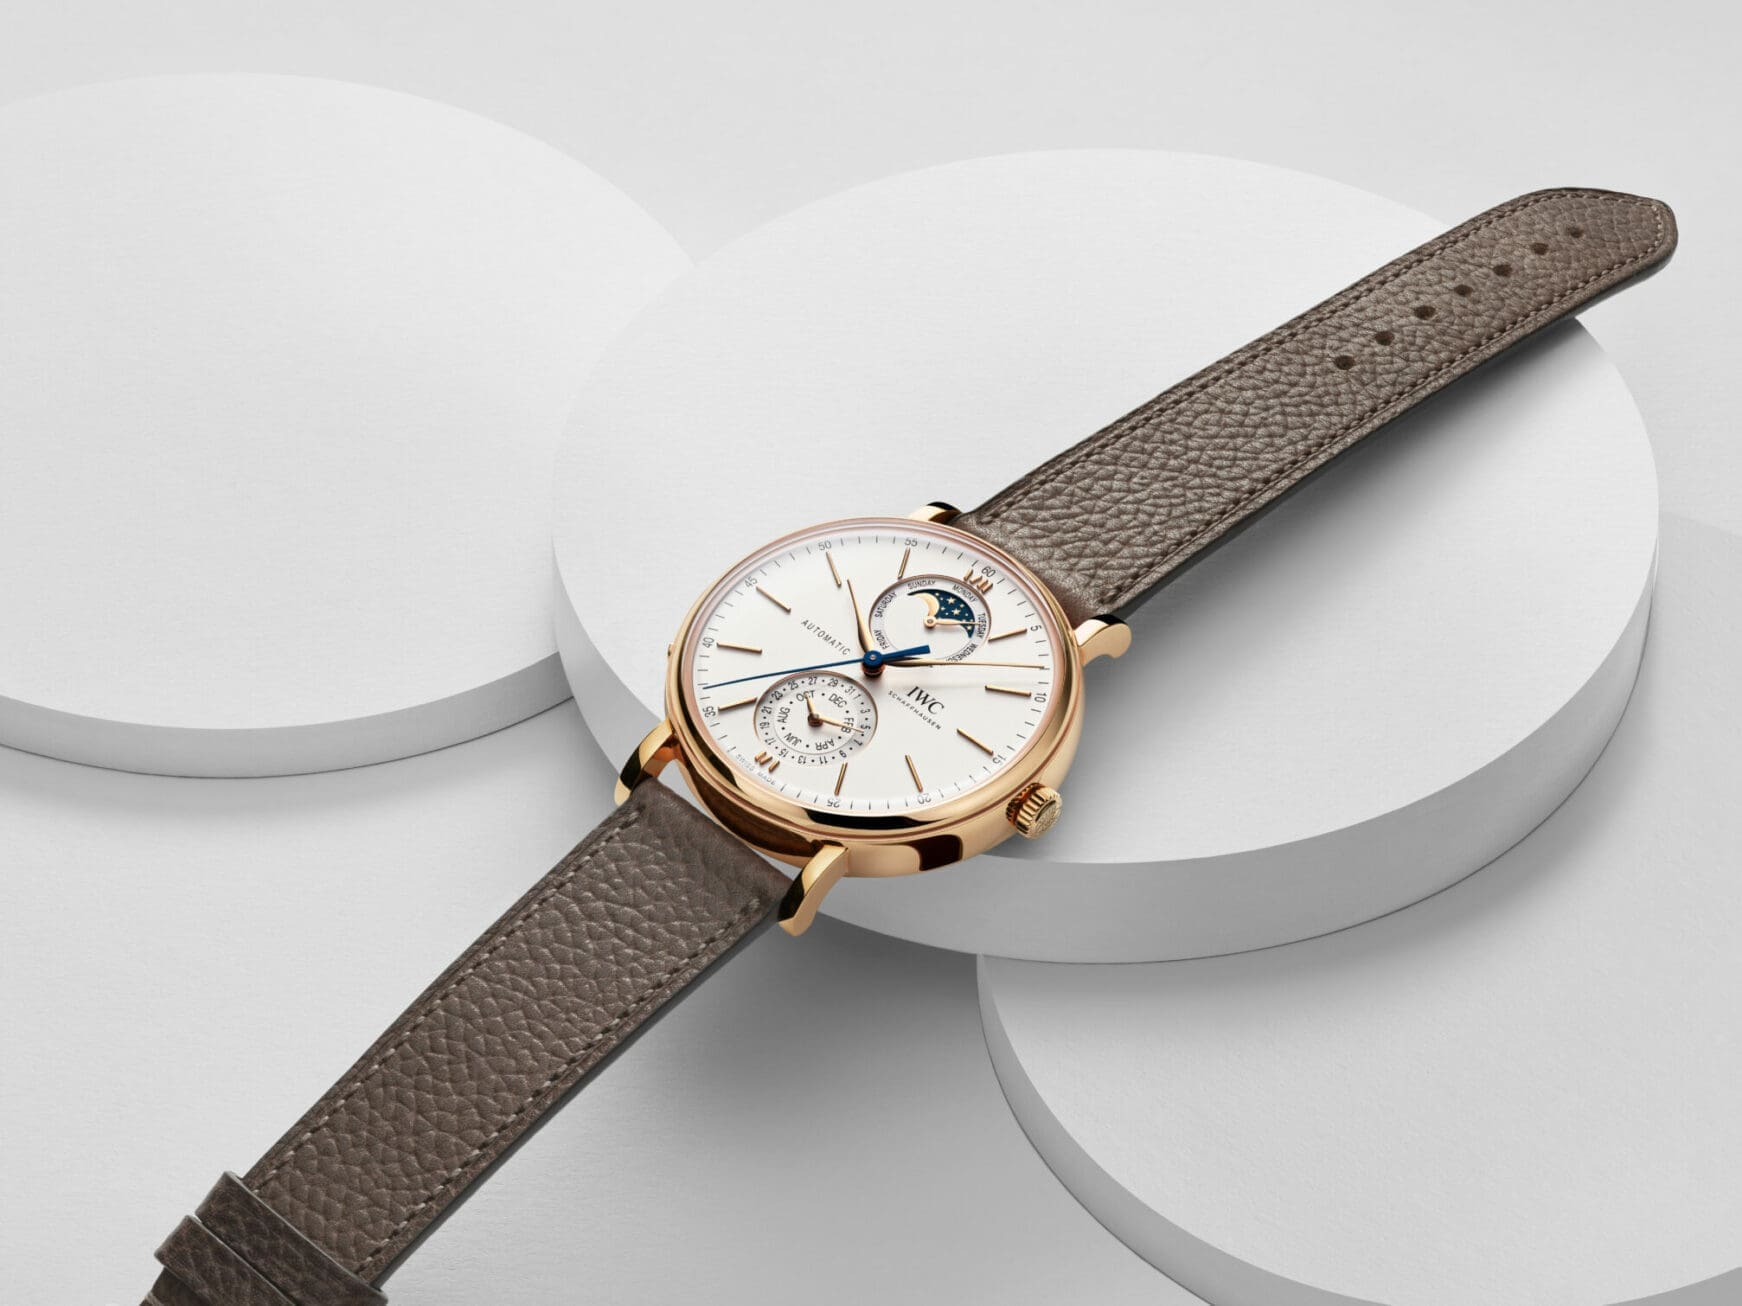 The IWC Portofino Complete Calendar features an exciting brand first